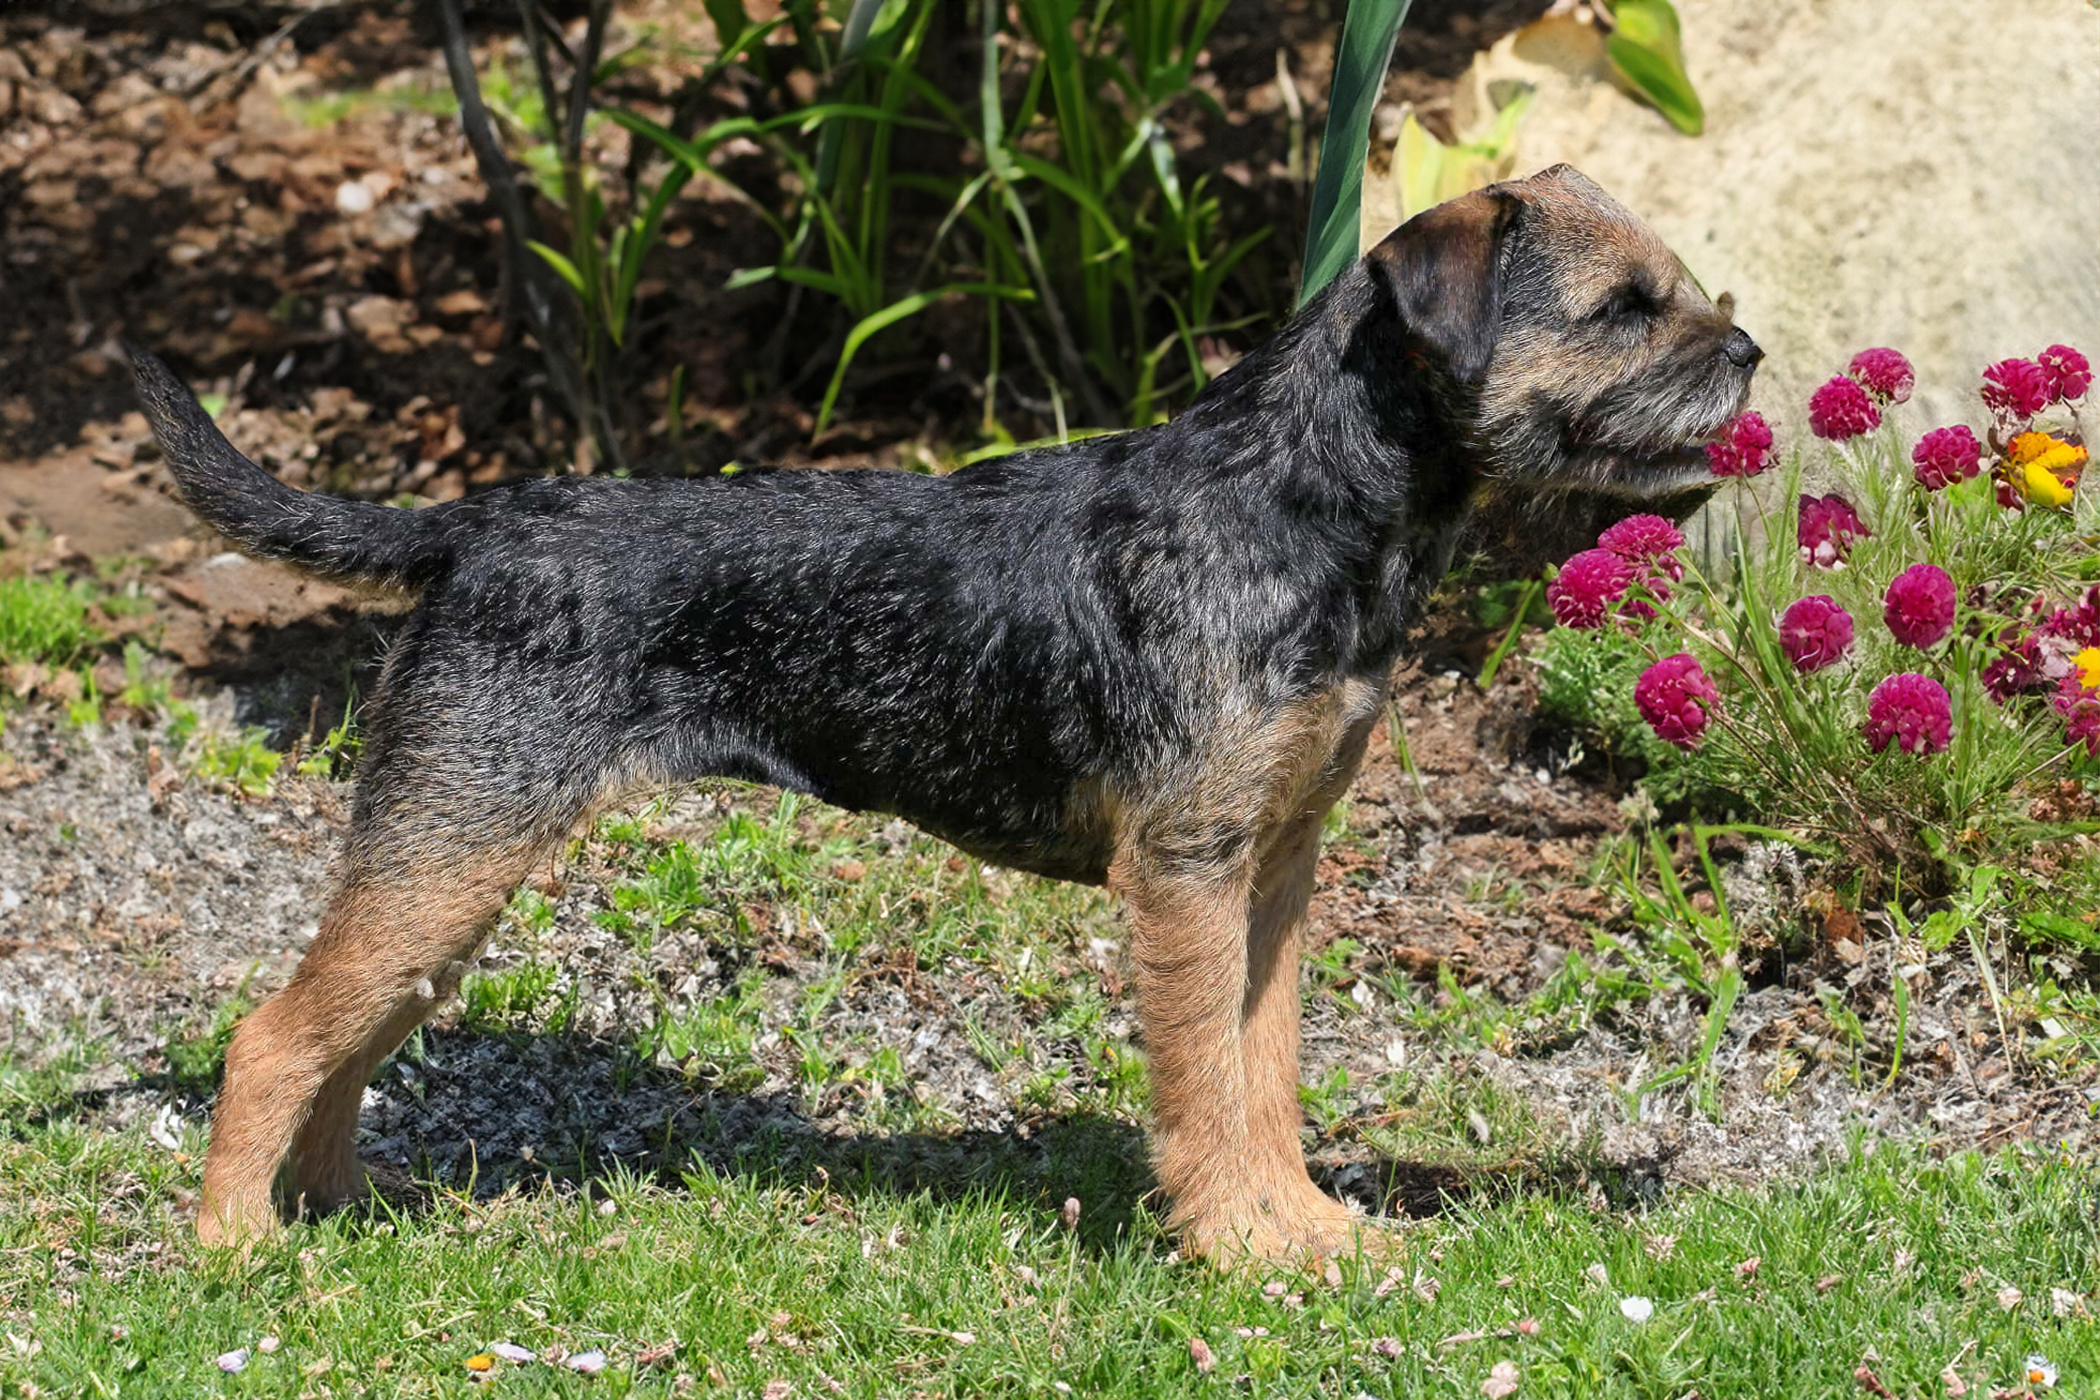 Border terrier loves going out on walks and explore open fields